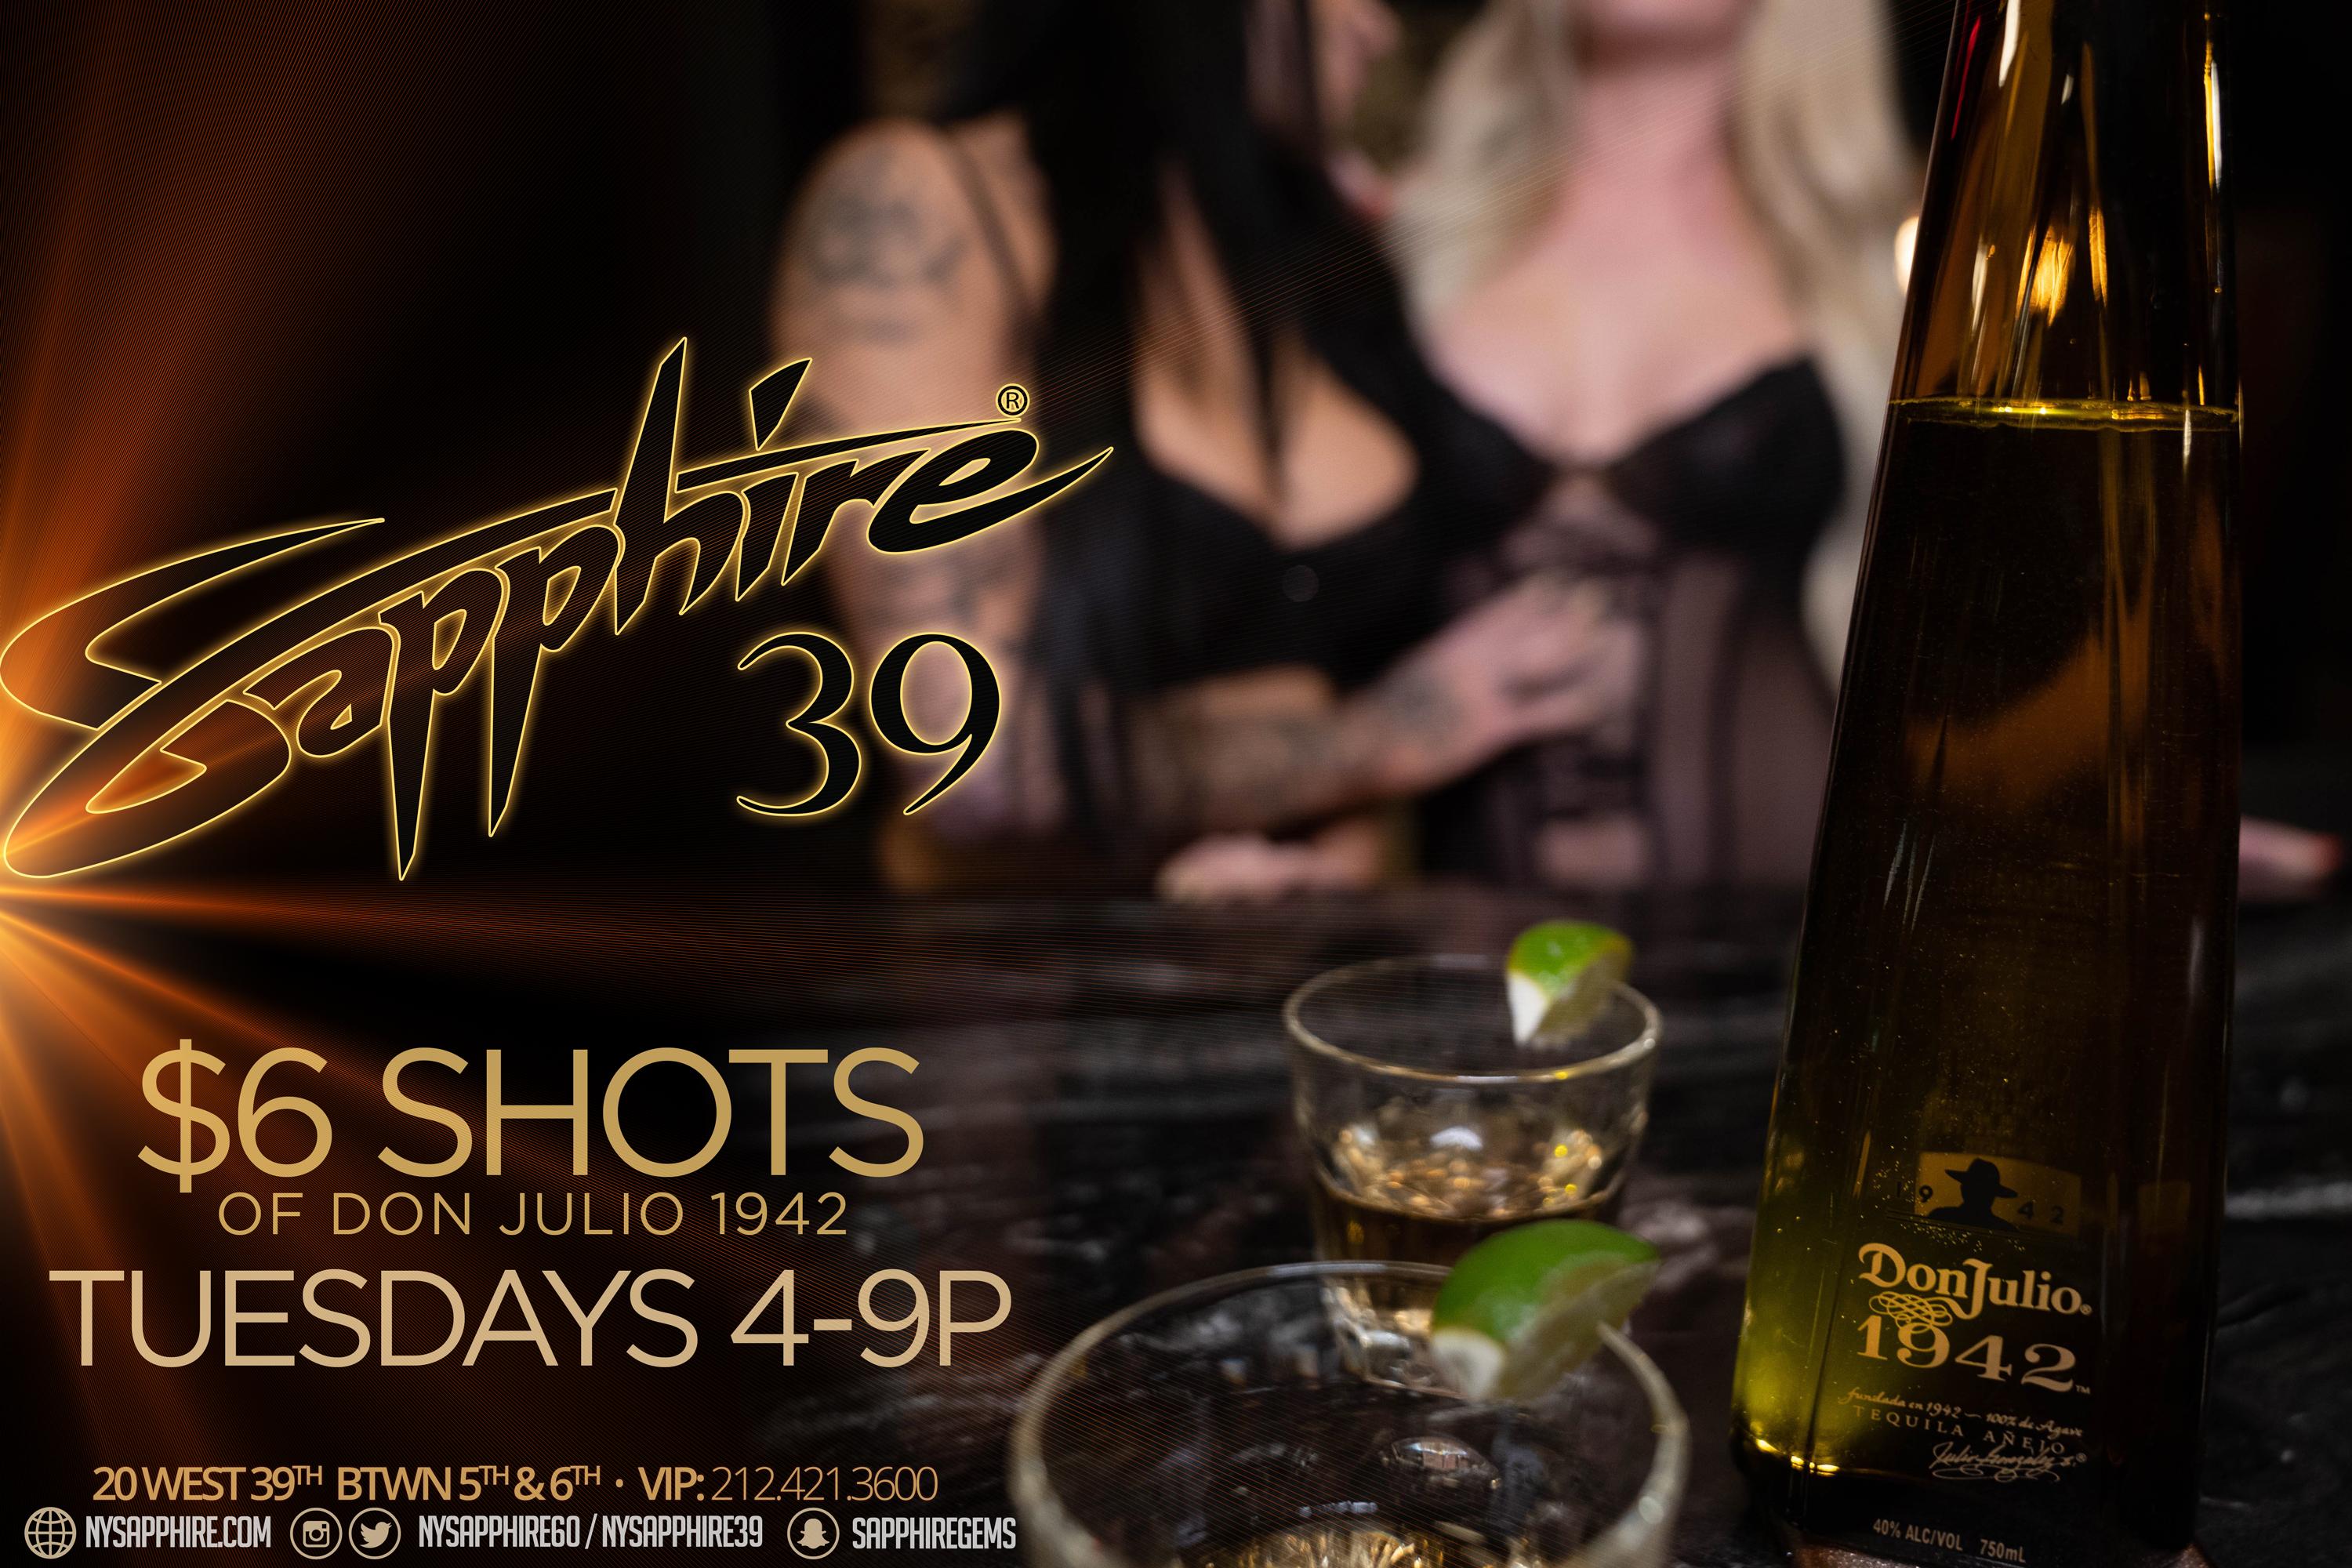 Tequila Tuesdays! - $6 Shots of Don Julio 1942 from 4p-9p